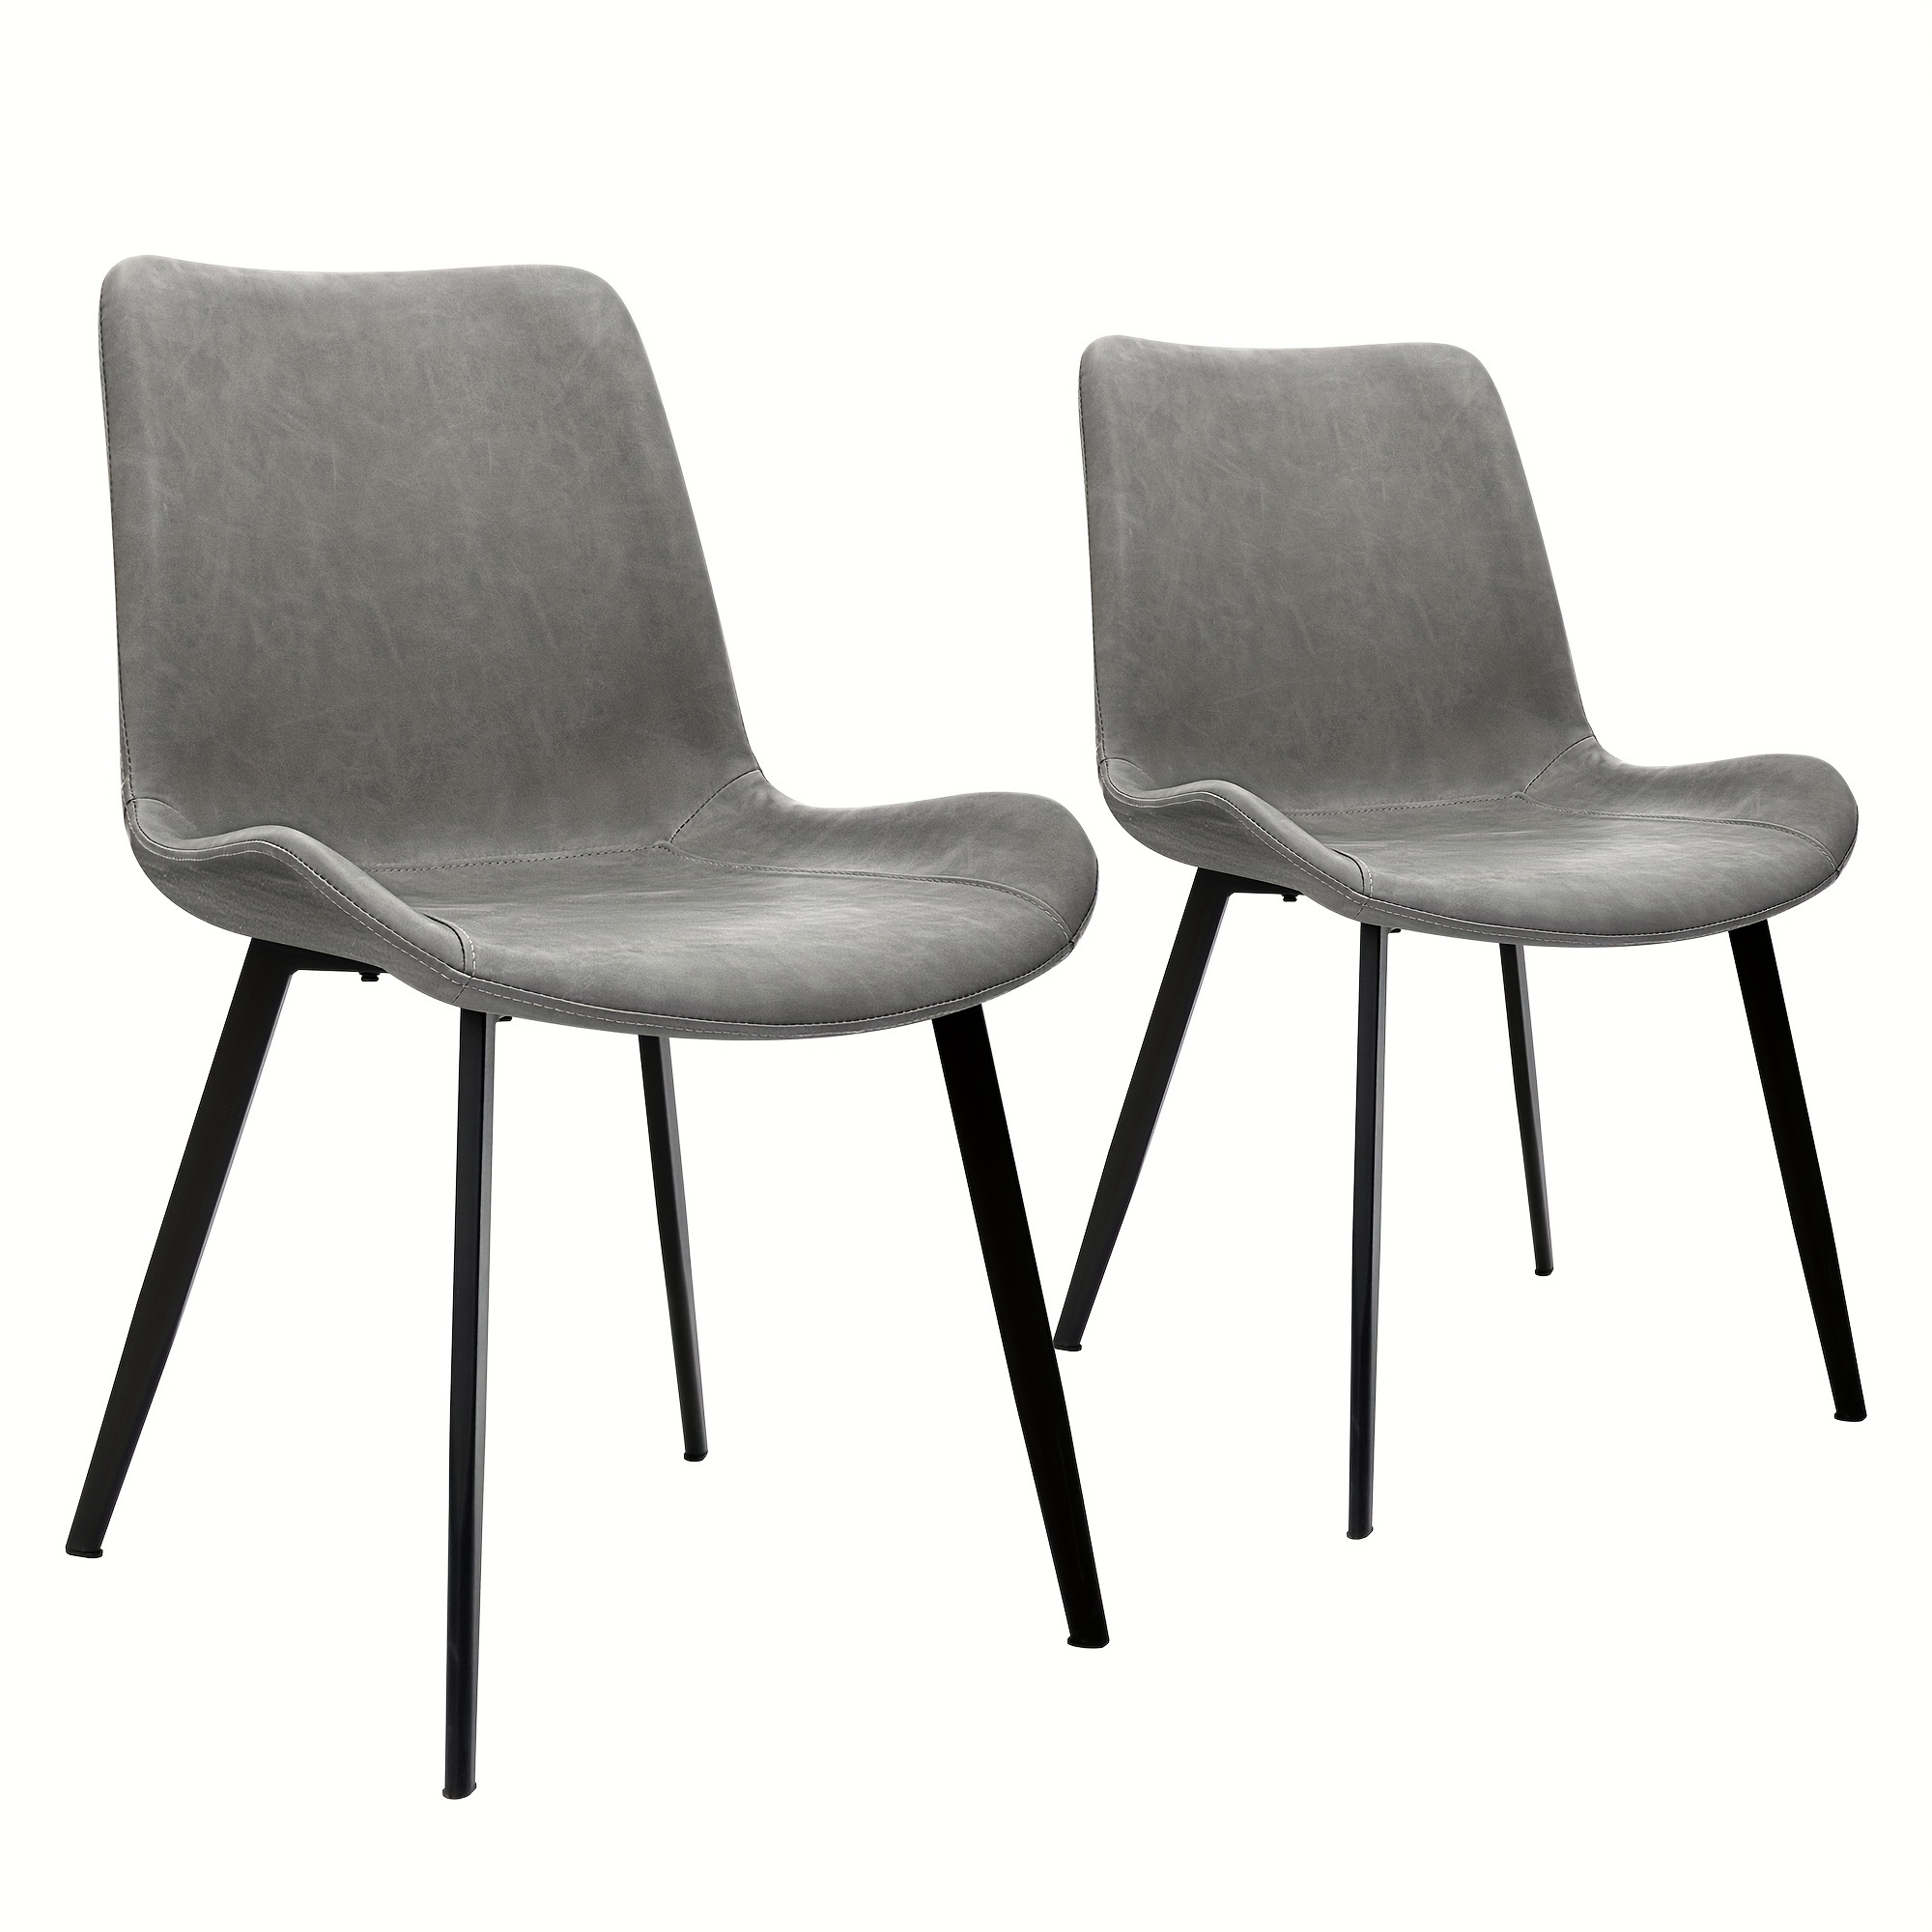 

Modern Faux Leather Dining Chairs, Pu Cushion Seat Back, Metal Legs For Kitchen Dining Room Side Chair, Set Of 2, Grey